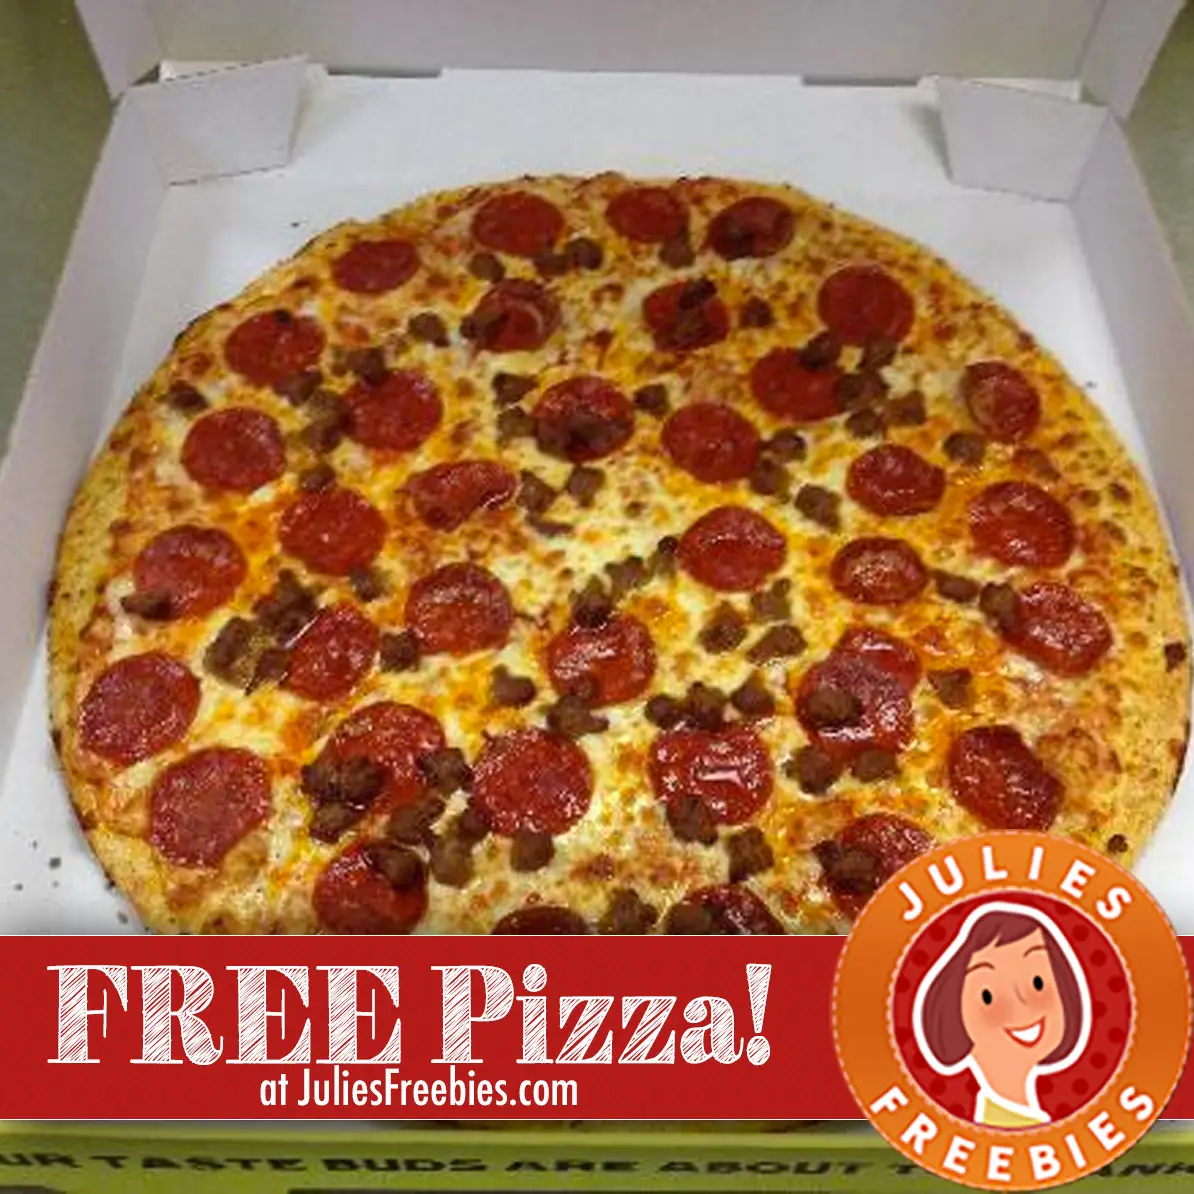 Free Pizza at Hungry Howie